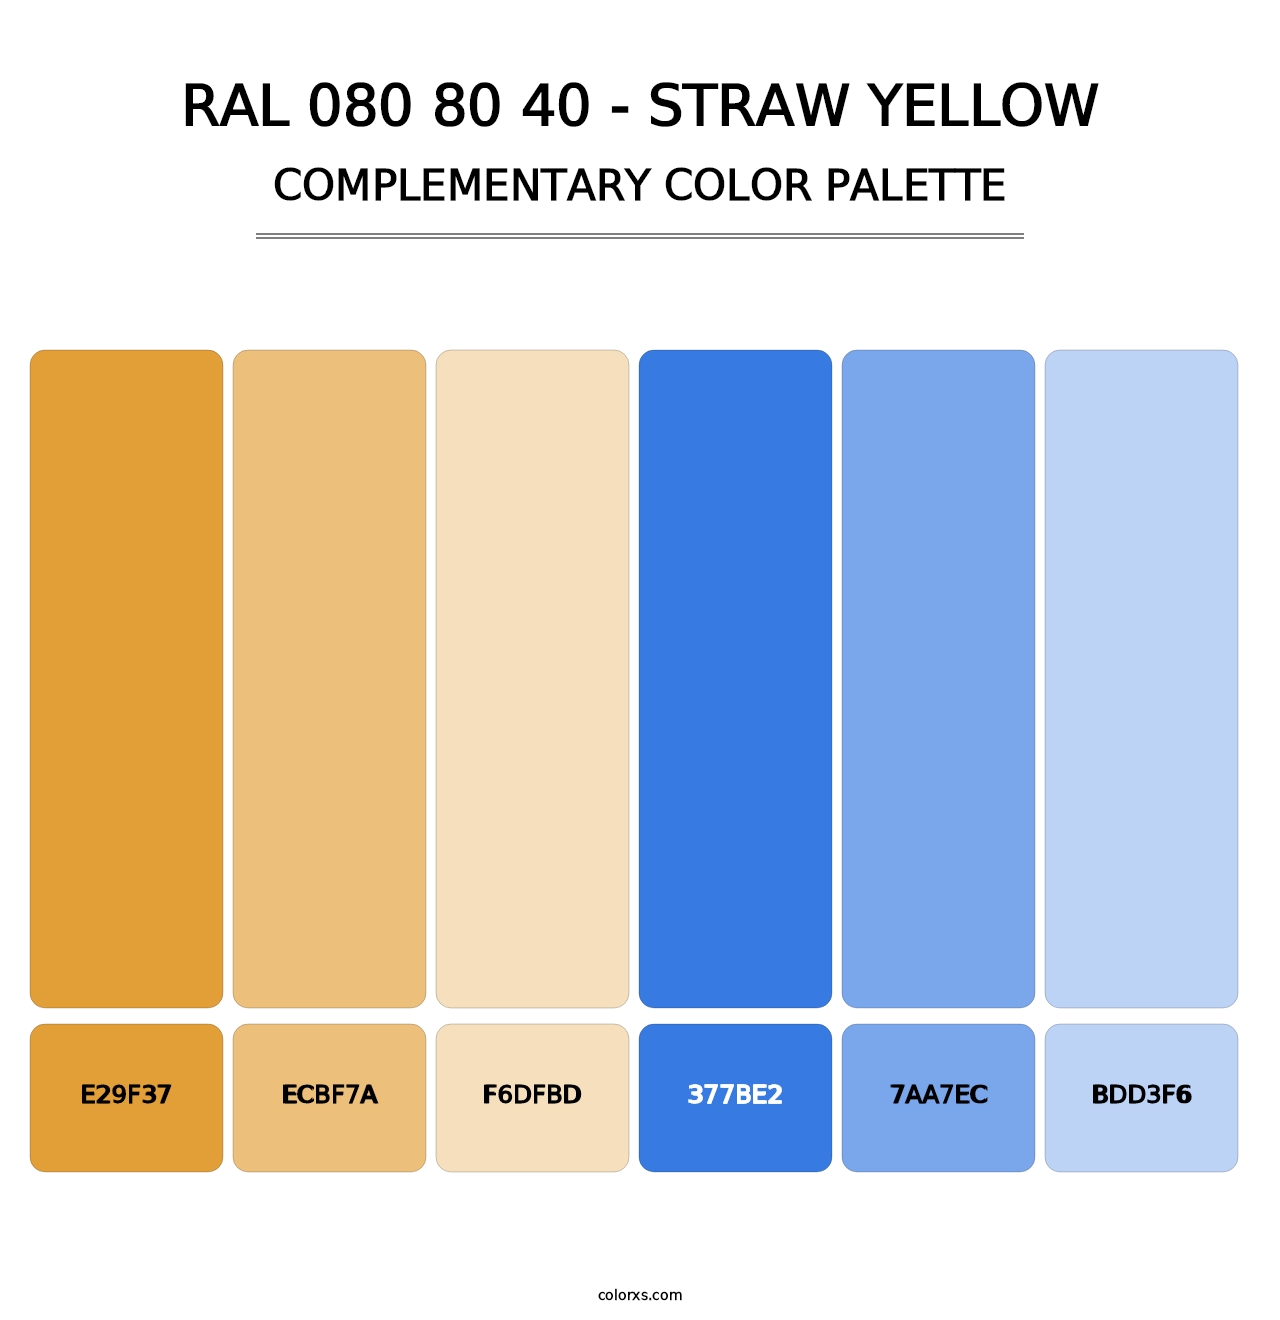 RAL 080 80 40 - Straw Yellow - Complementary Color Palette